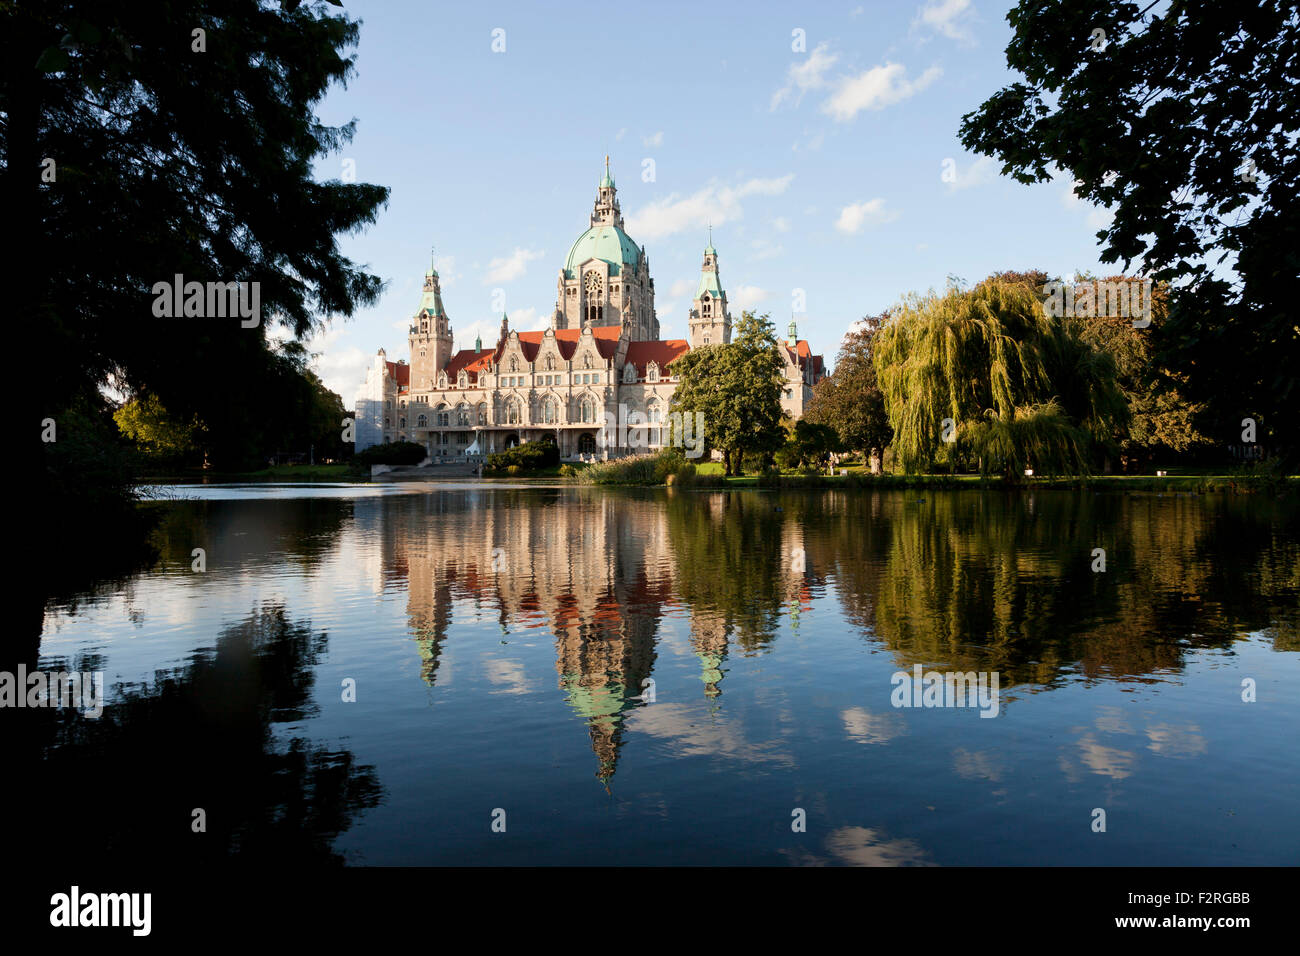 The New Town Hall and lake Maschteich in Hanover, Lower Saxony, Germany Stock Photo